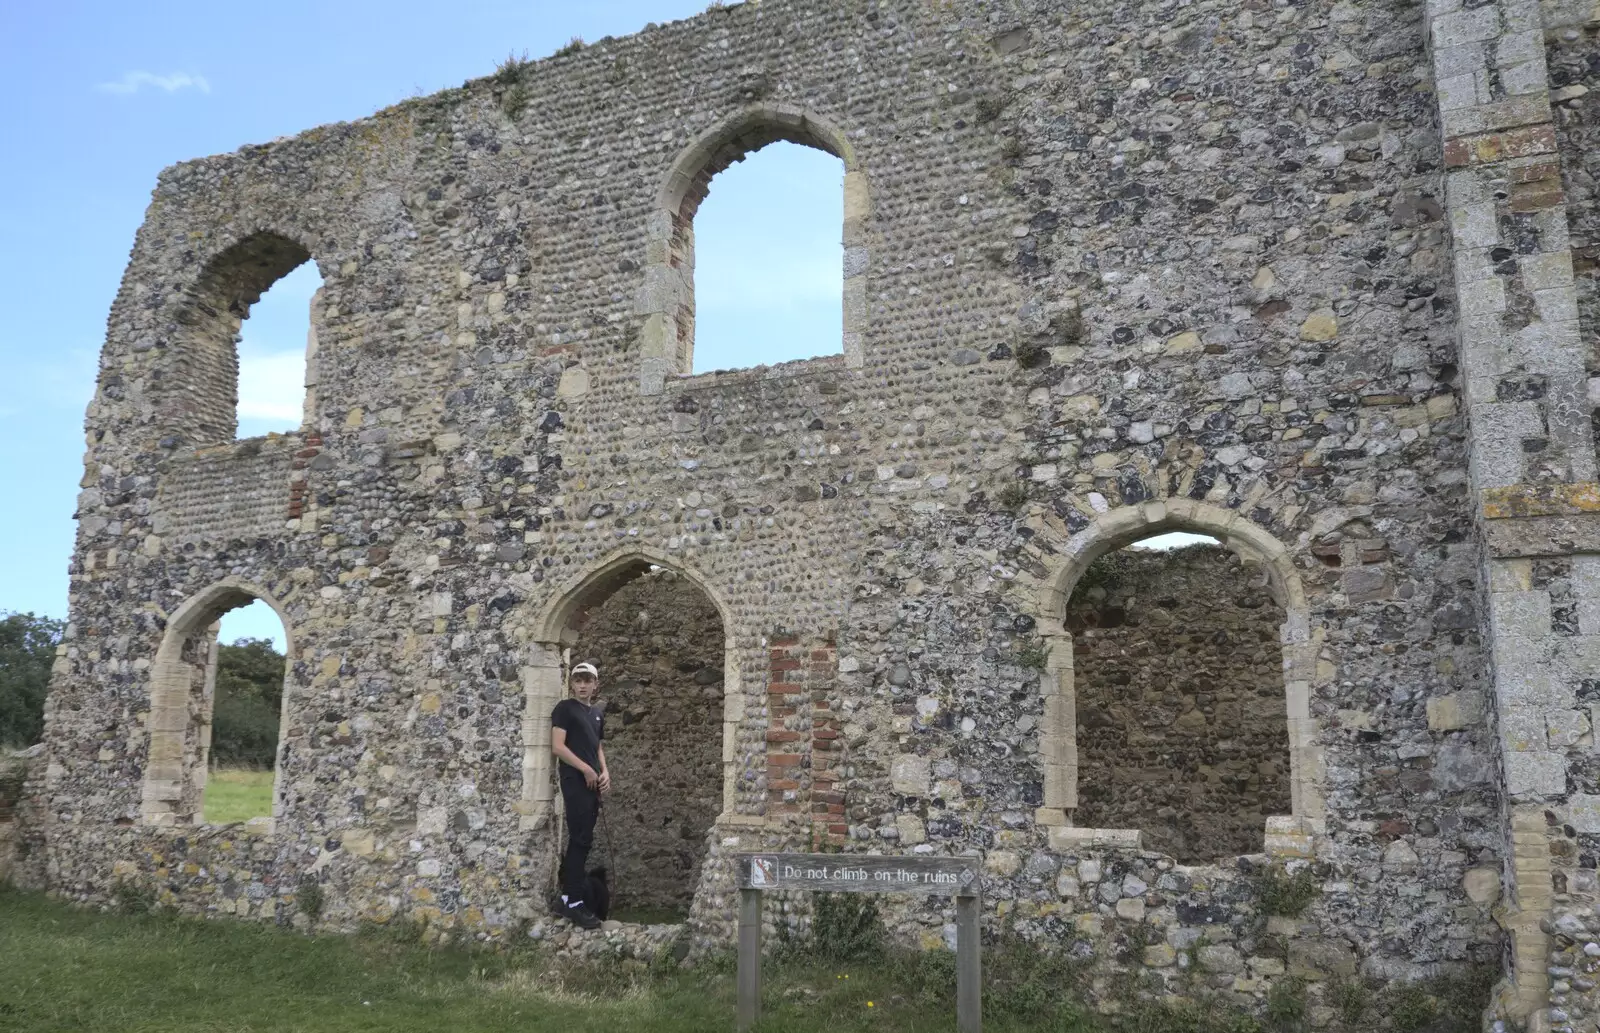 Lucas in the ruins of Greyfriars, from A Cambridge Reunion on the Beach, Dunwich, Suffolk - 23rd August 2023